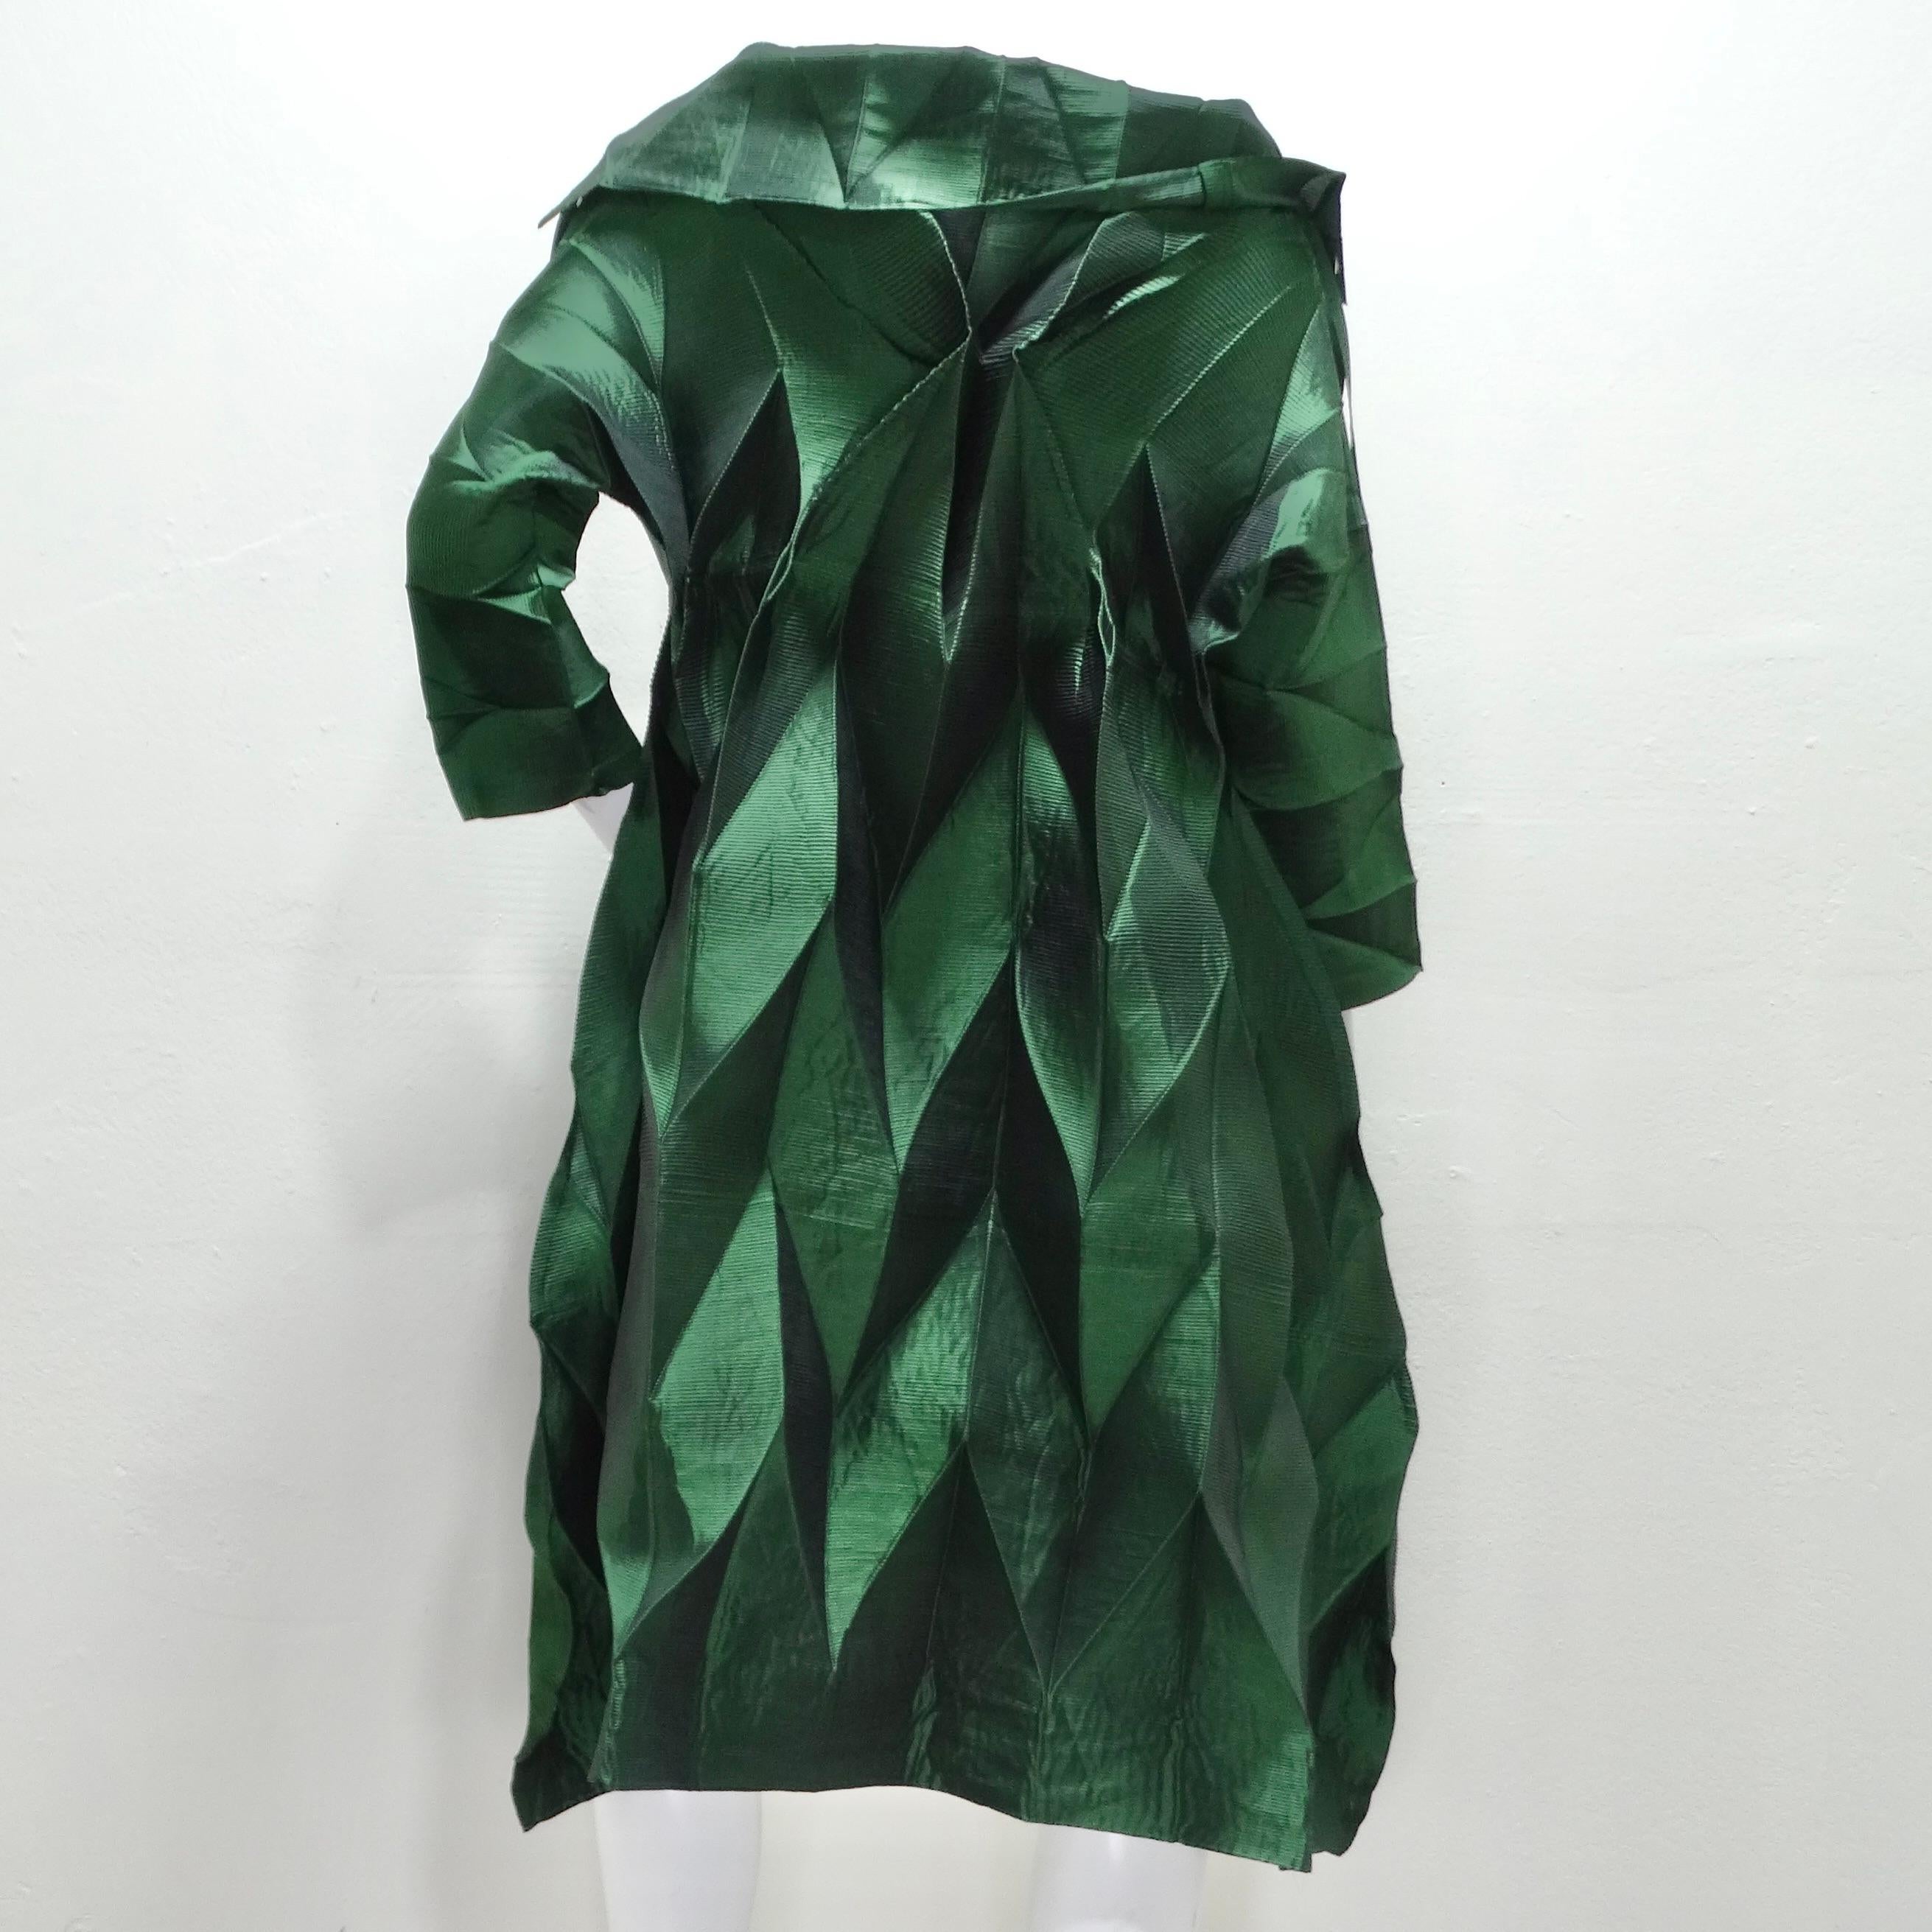 Issey Miyake Spring 2008 Runway Green Pleated Dress For Sale 2